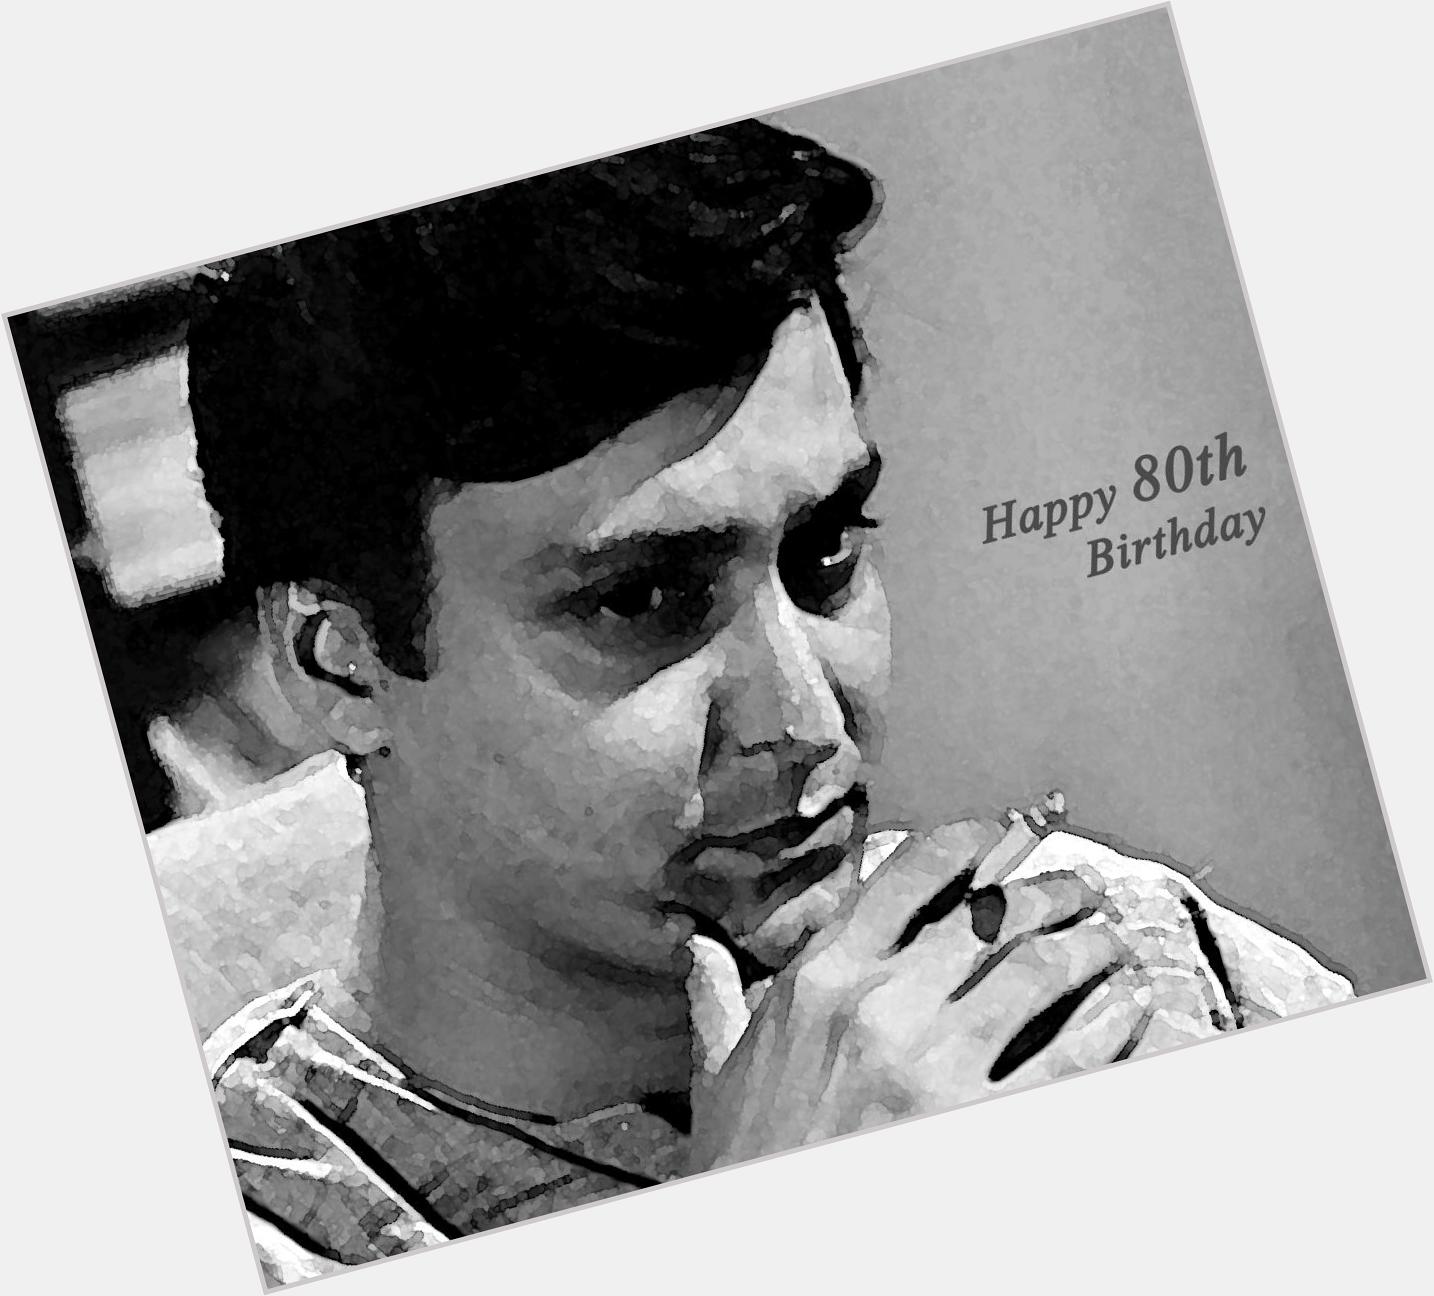 Wishing Soumitra Chatterjee a Happy 80th Birthday... An iconic Bengali both on & off screen, a legend... 